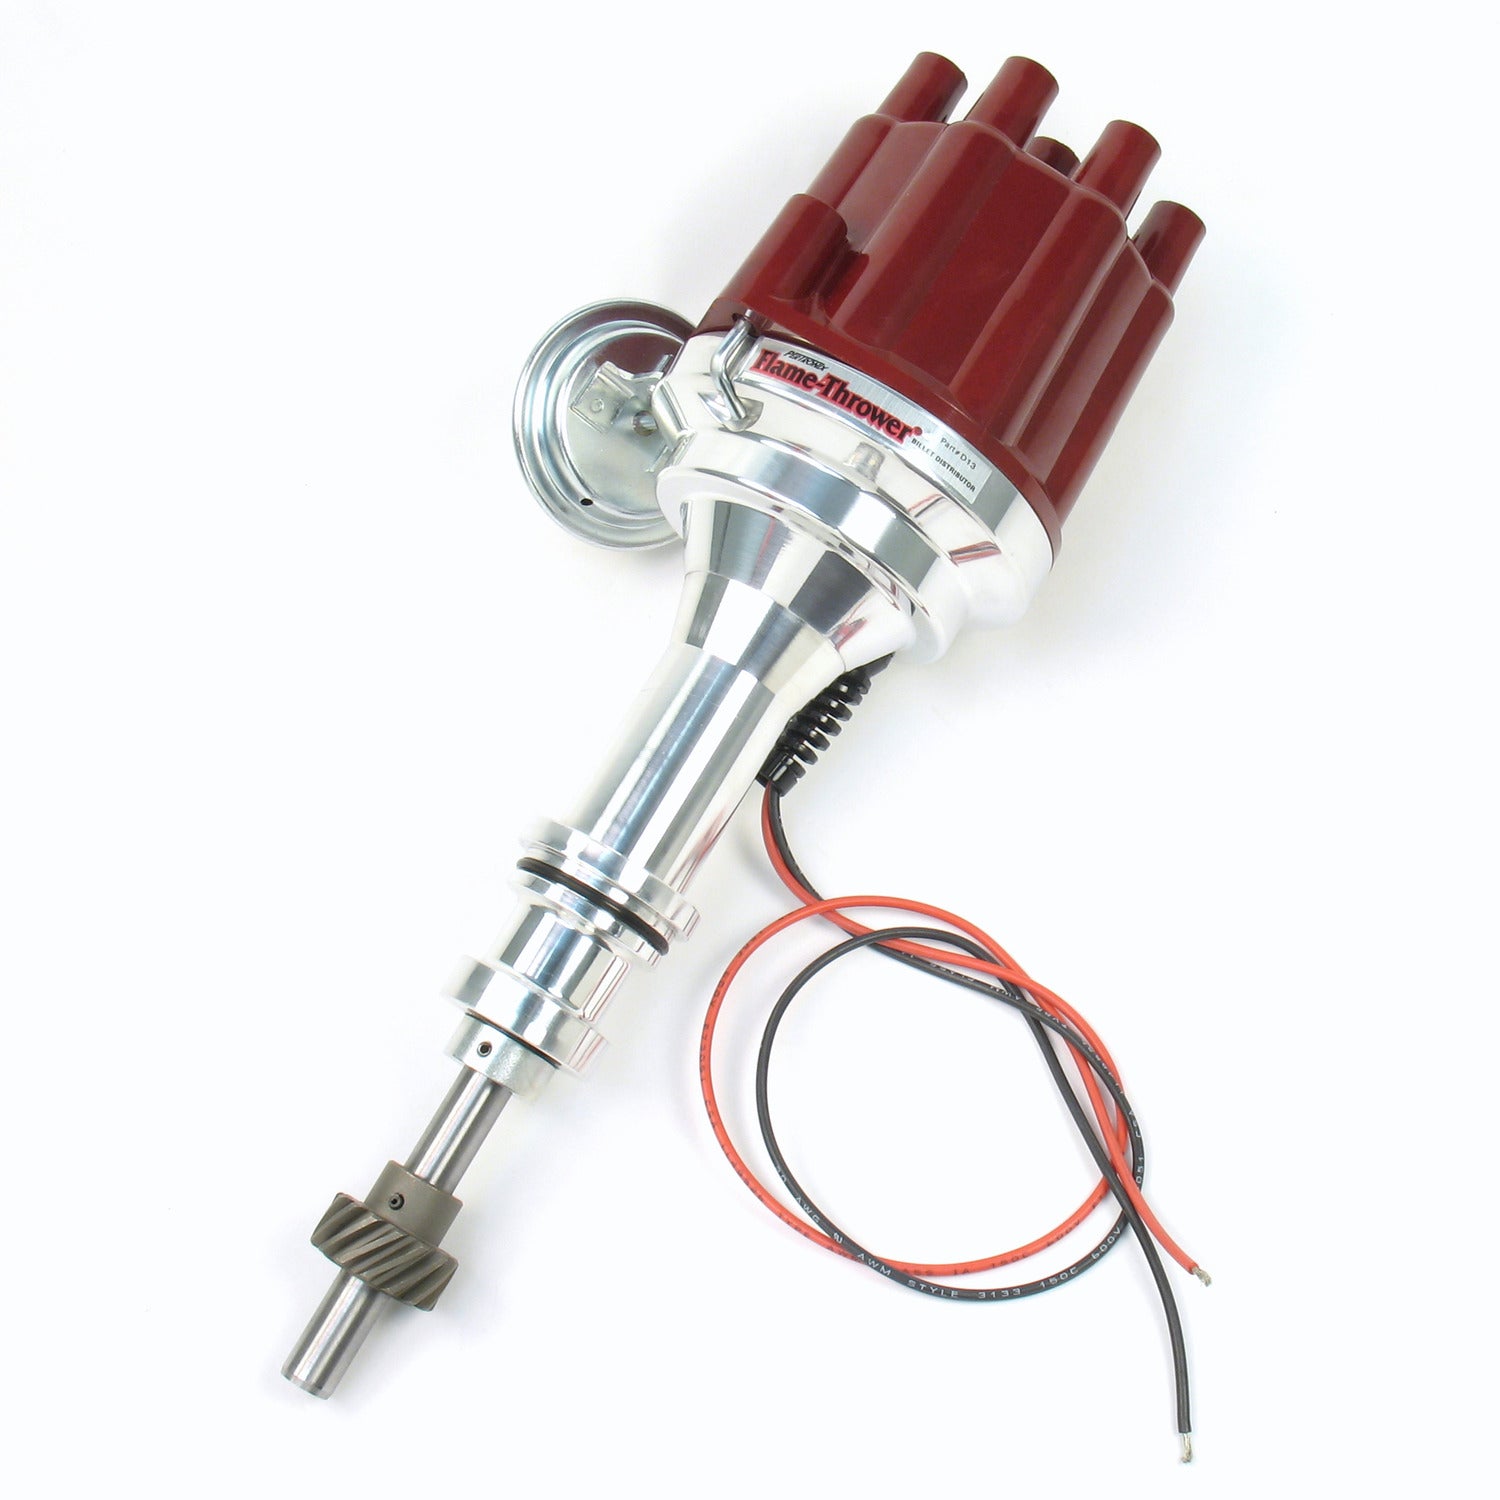 PerTronix D130701 Flame-Thrower Electronic Distributor Billet Ford Small Block Plug and Play with Ignitor II Technology Vacuum Advance Red Cap